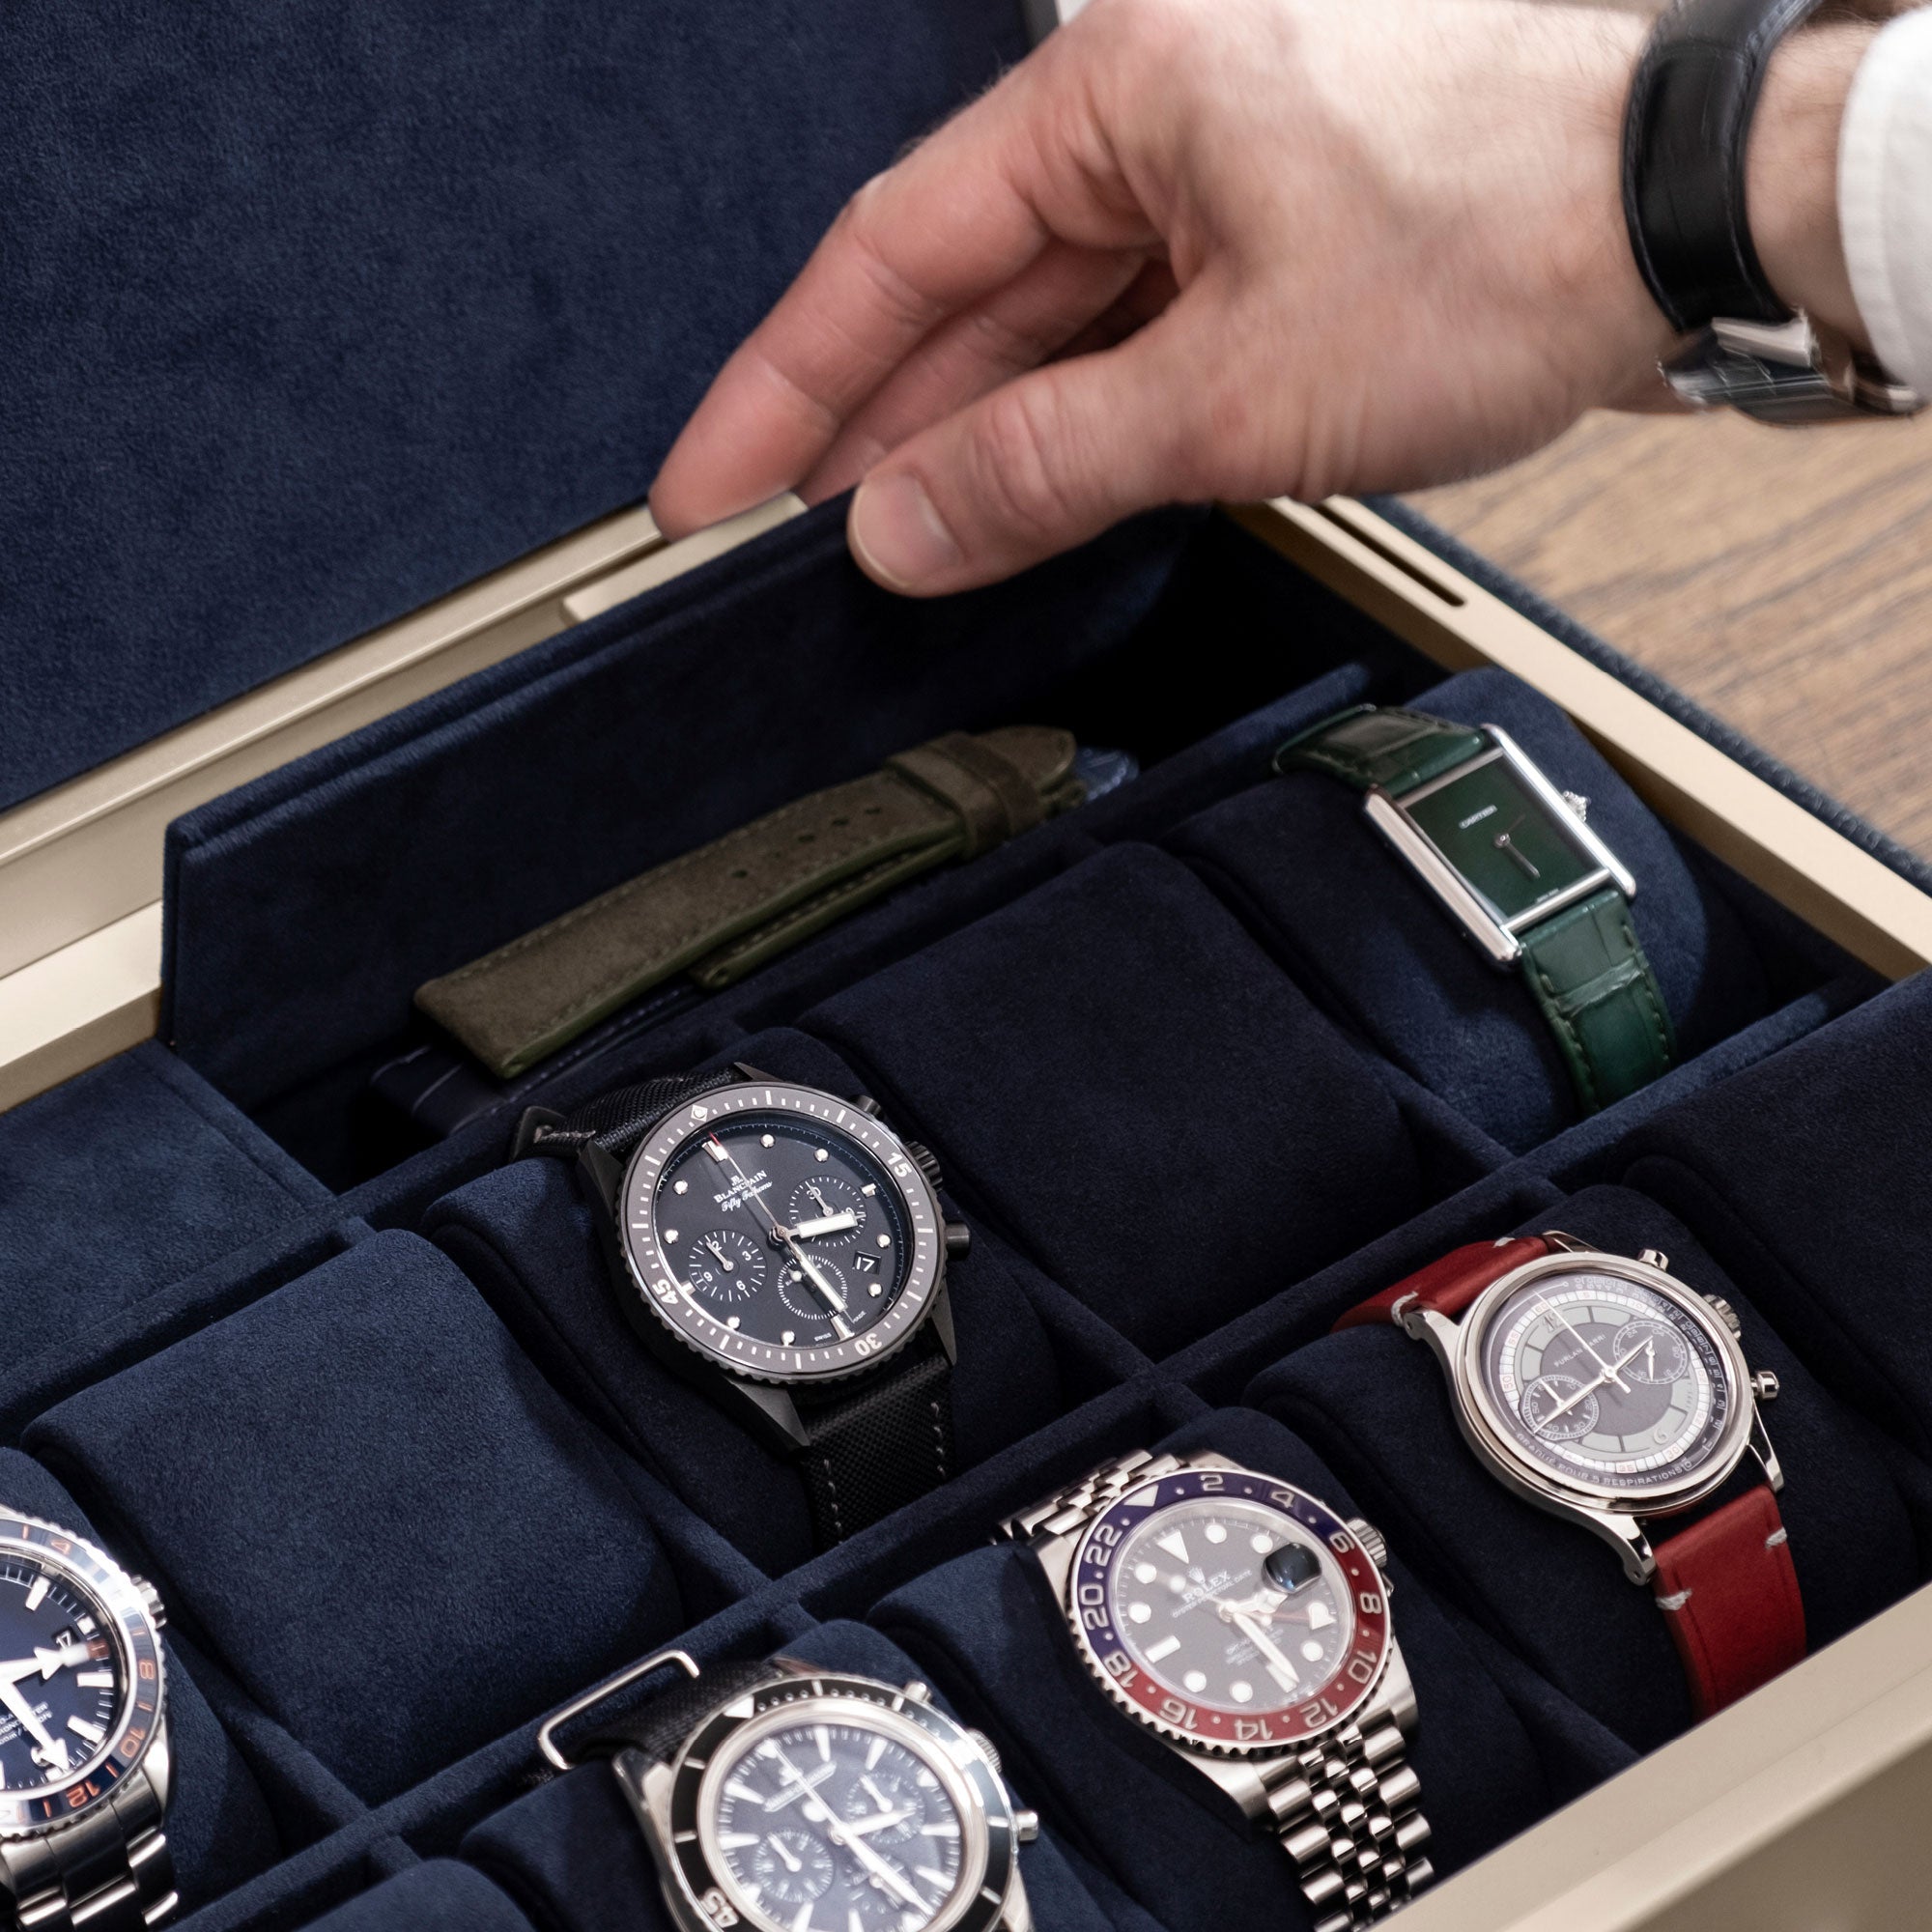 Man opening additional storage compartment of his gold Spence 12 Watch box holding his collection of luxury watches